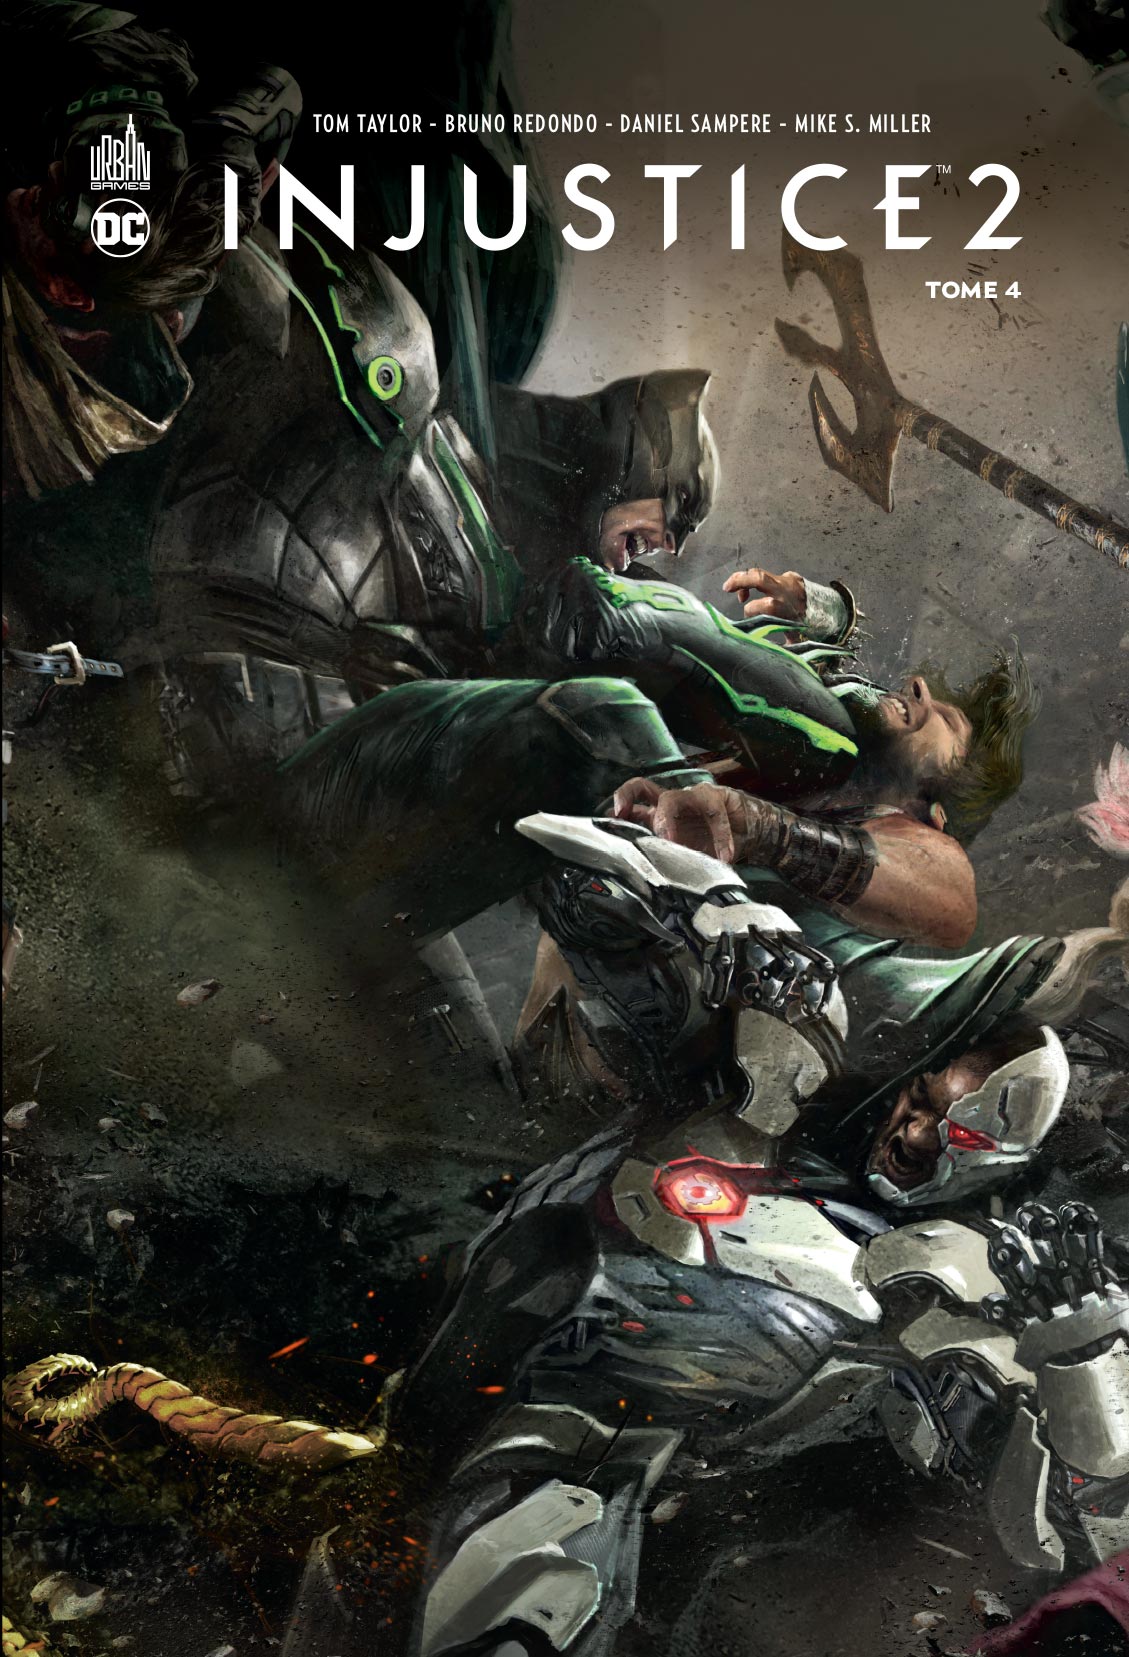 Injustice 2 – Tome 4 - couv